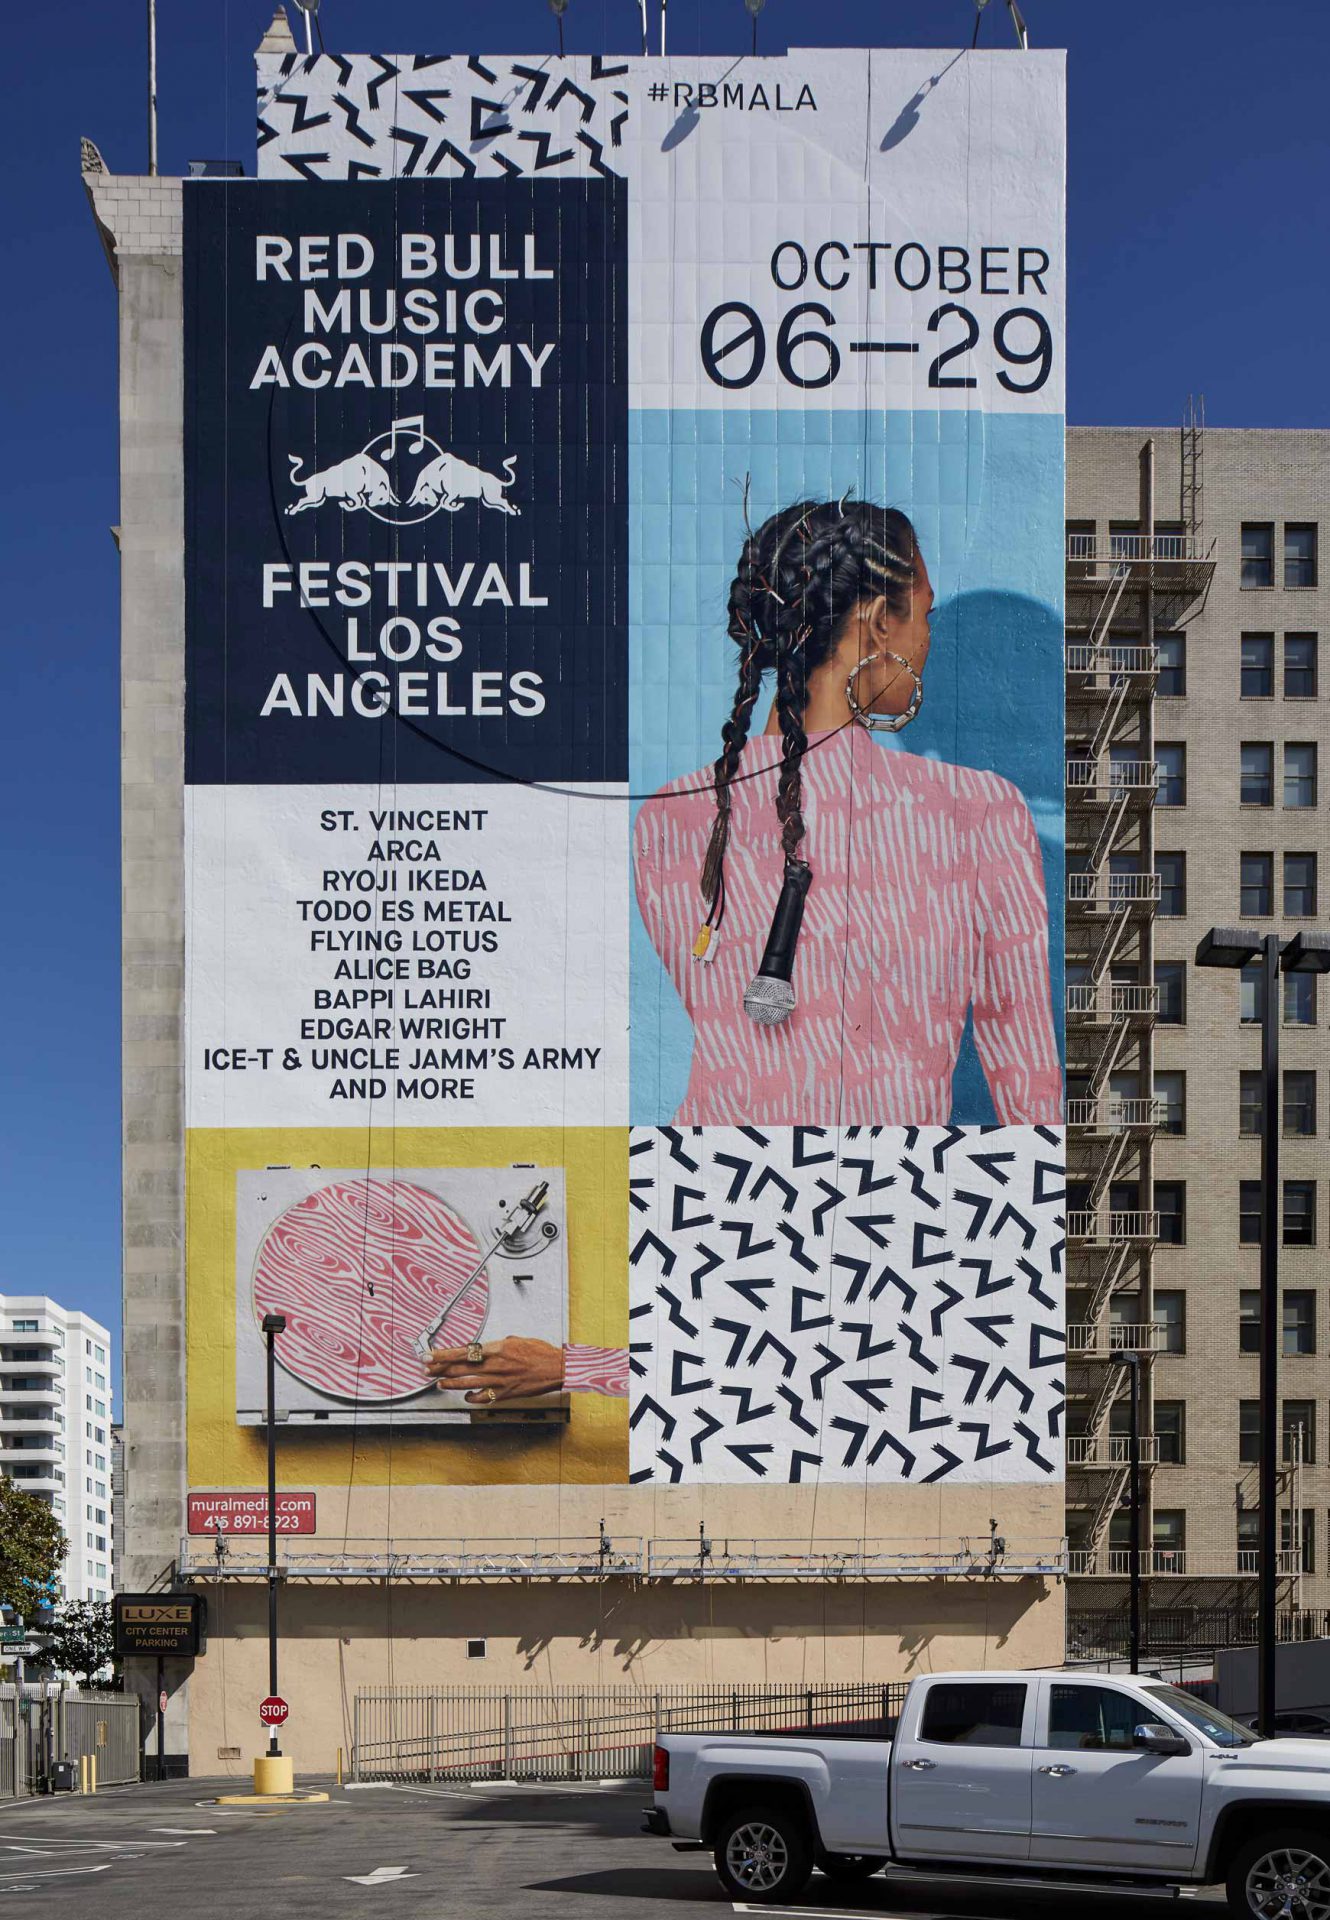 Red Bull Music Academy Festival Los Angeles